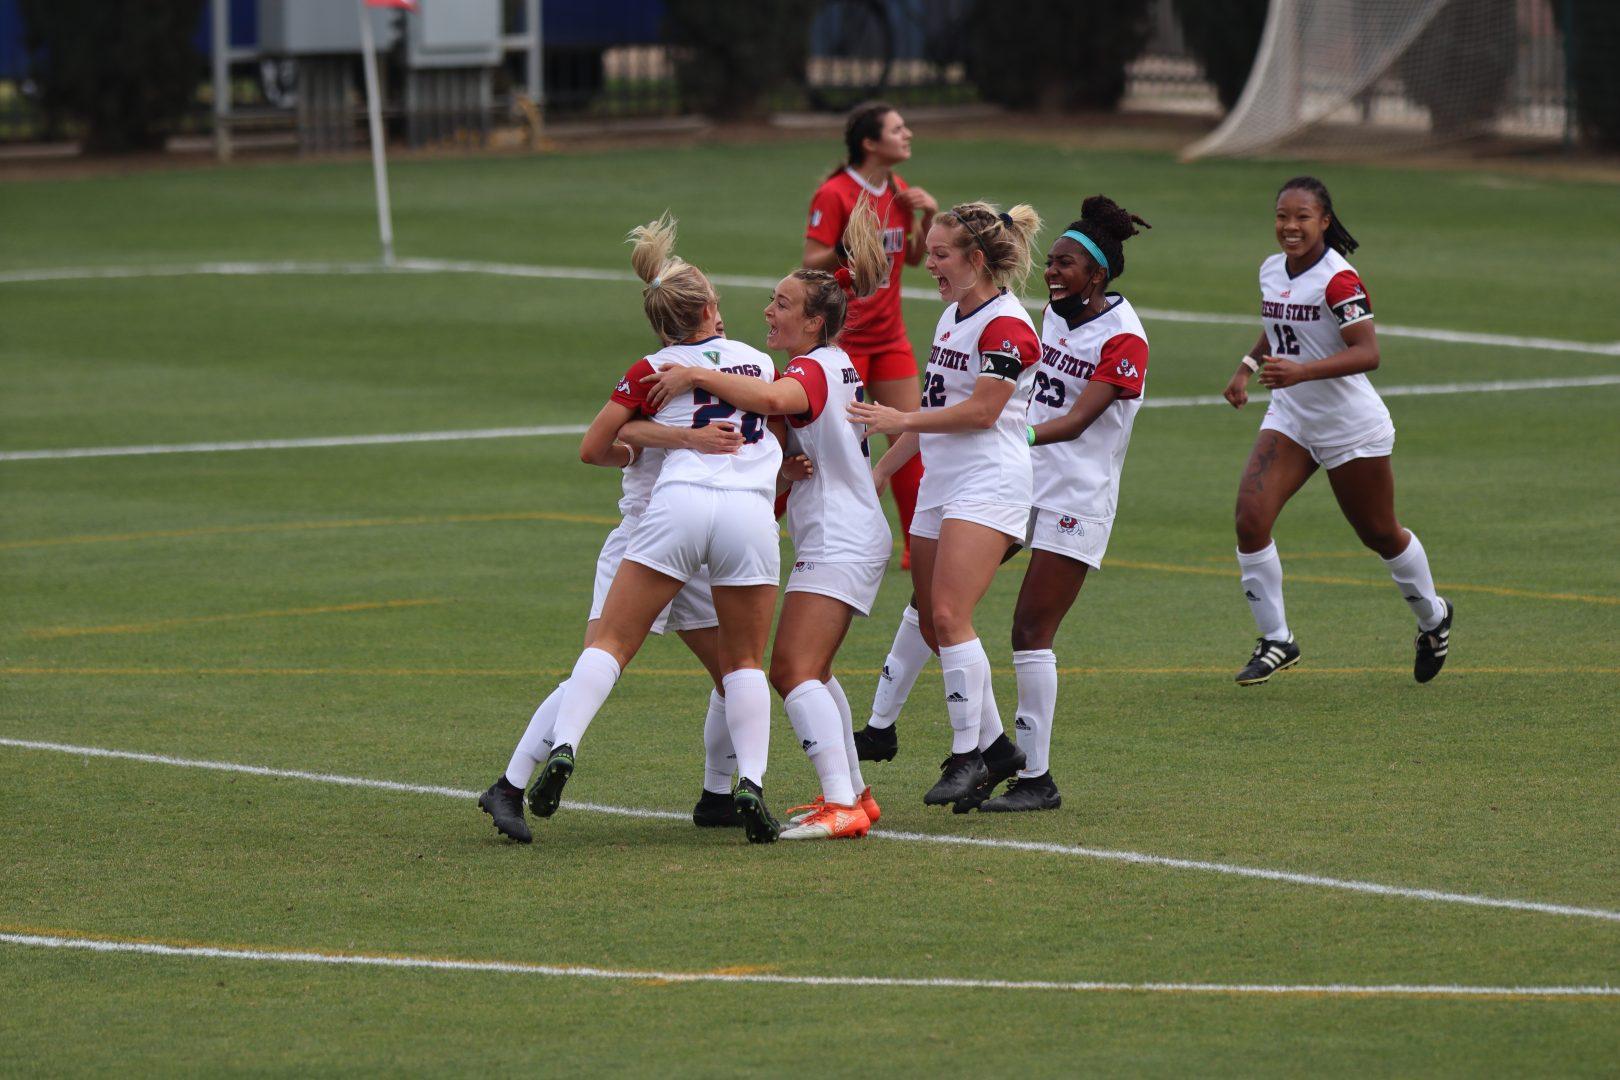 The+Bulldogs+celebrate+after+Fresno+State+defender+Bailee+Kern+scores+a+goal+against+UNLV+on+March+12%2C+2021%2C+at+the+Fresno+State+Soccer+Stadium.+%28Kameron+Thorn+%2FThe+Collegian%29